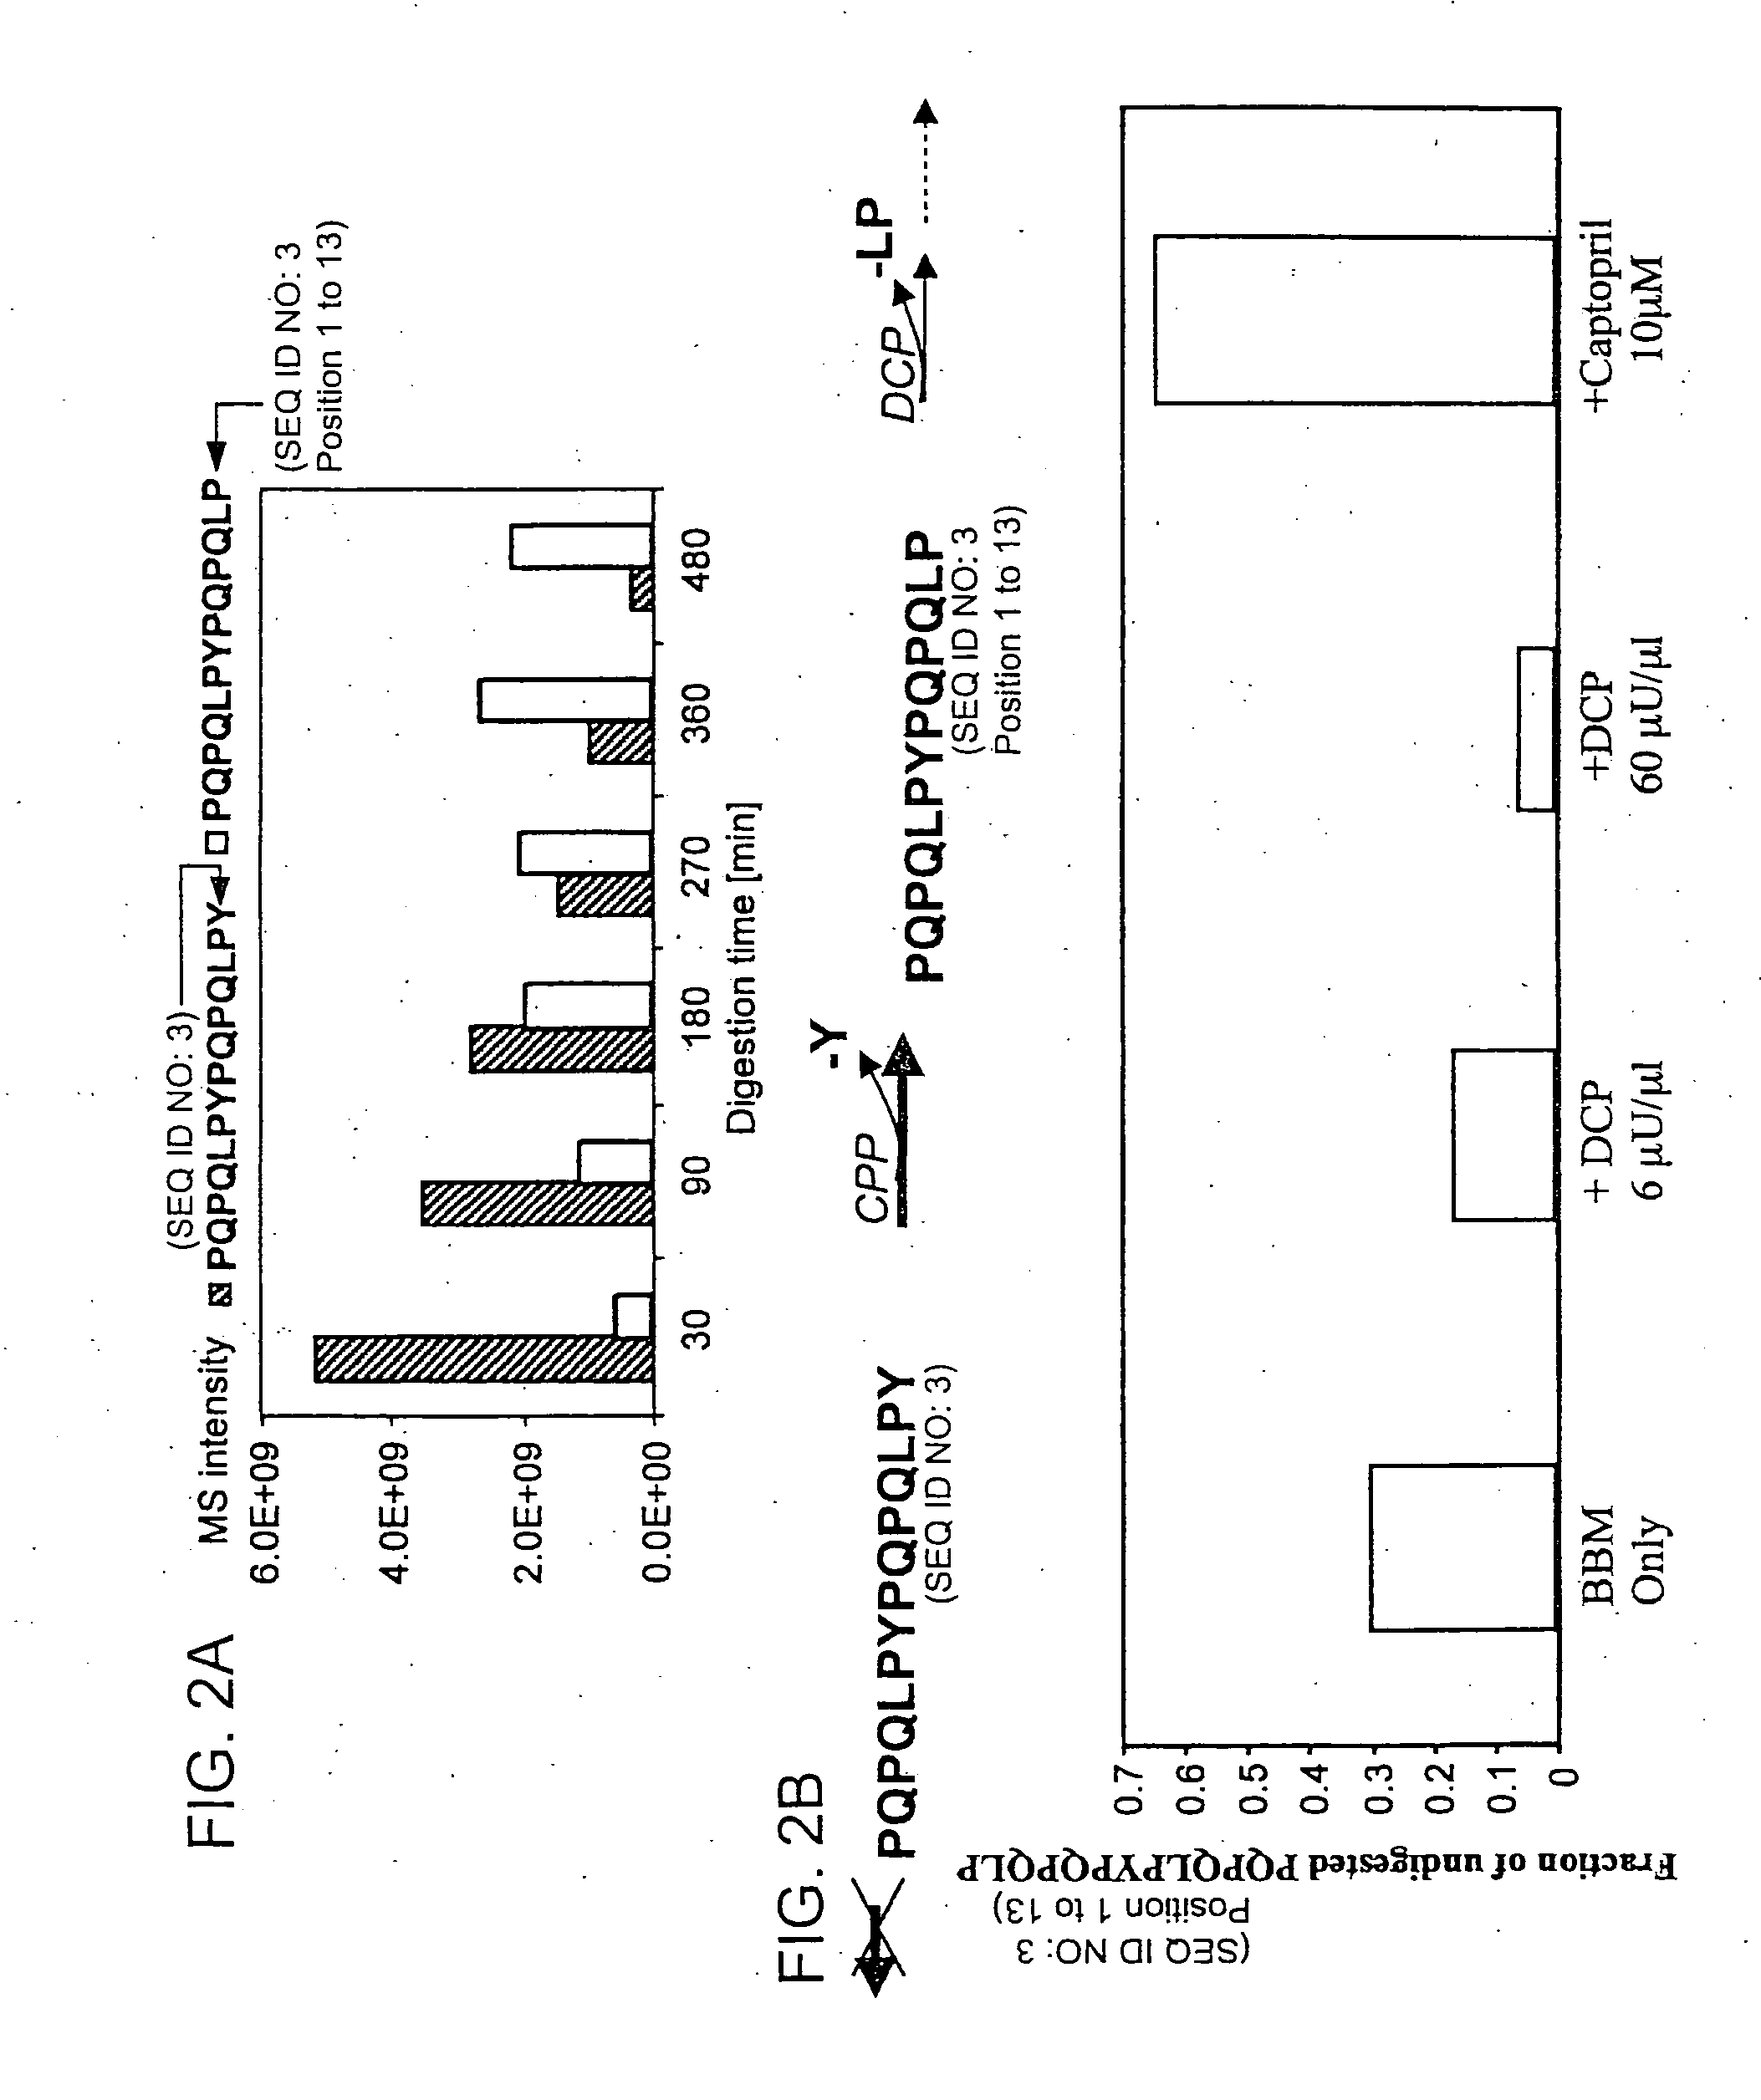 Peptides for diagnostic and therapeutic methods for celiac sprue